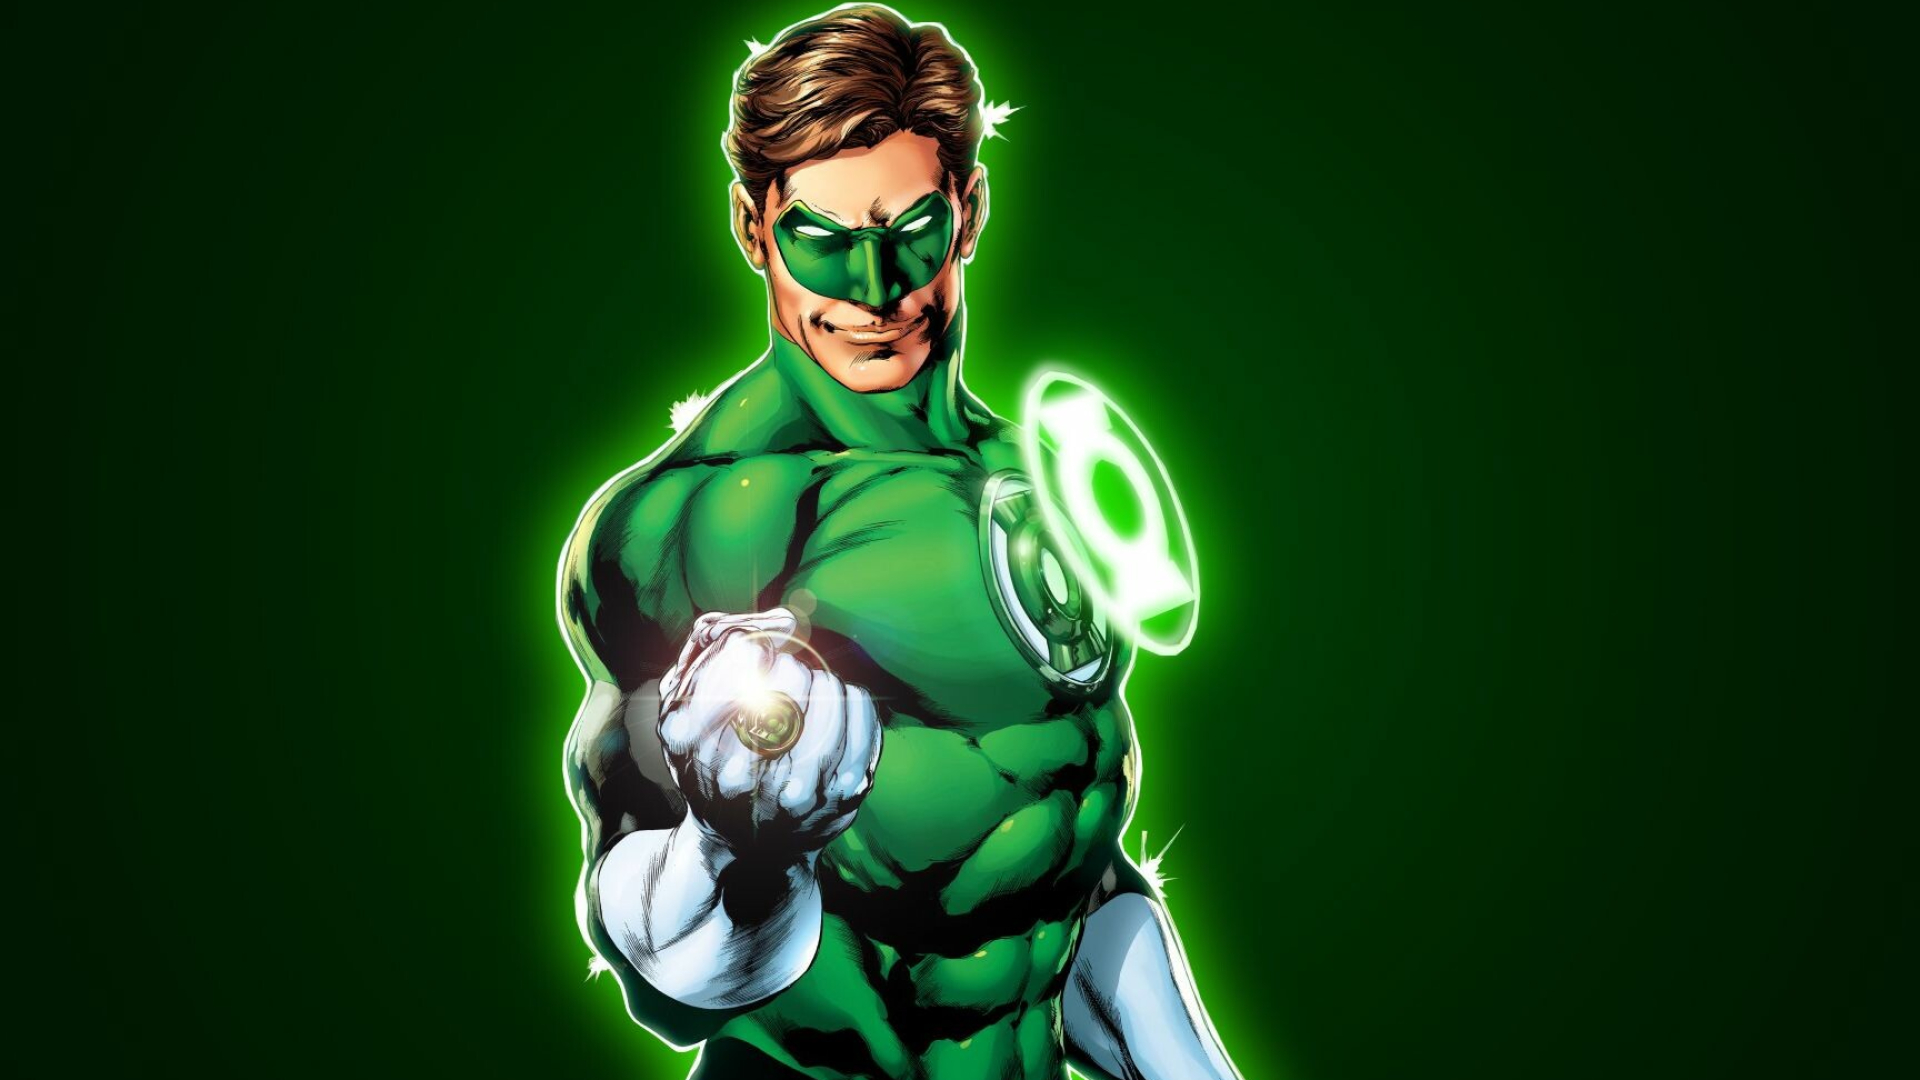 Green Lantern: Hal Jordan, upholding justice and defeating evil. 1920x1080 Full HD Background.